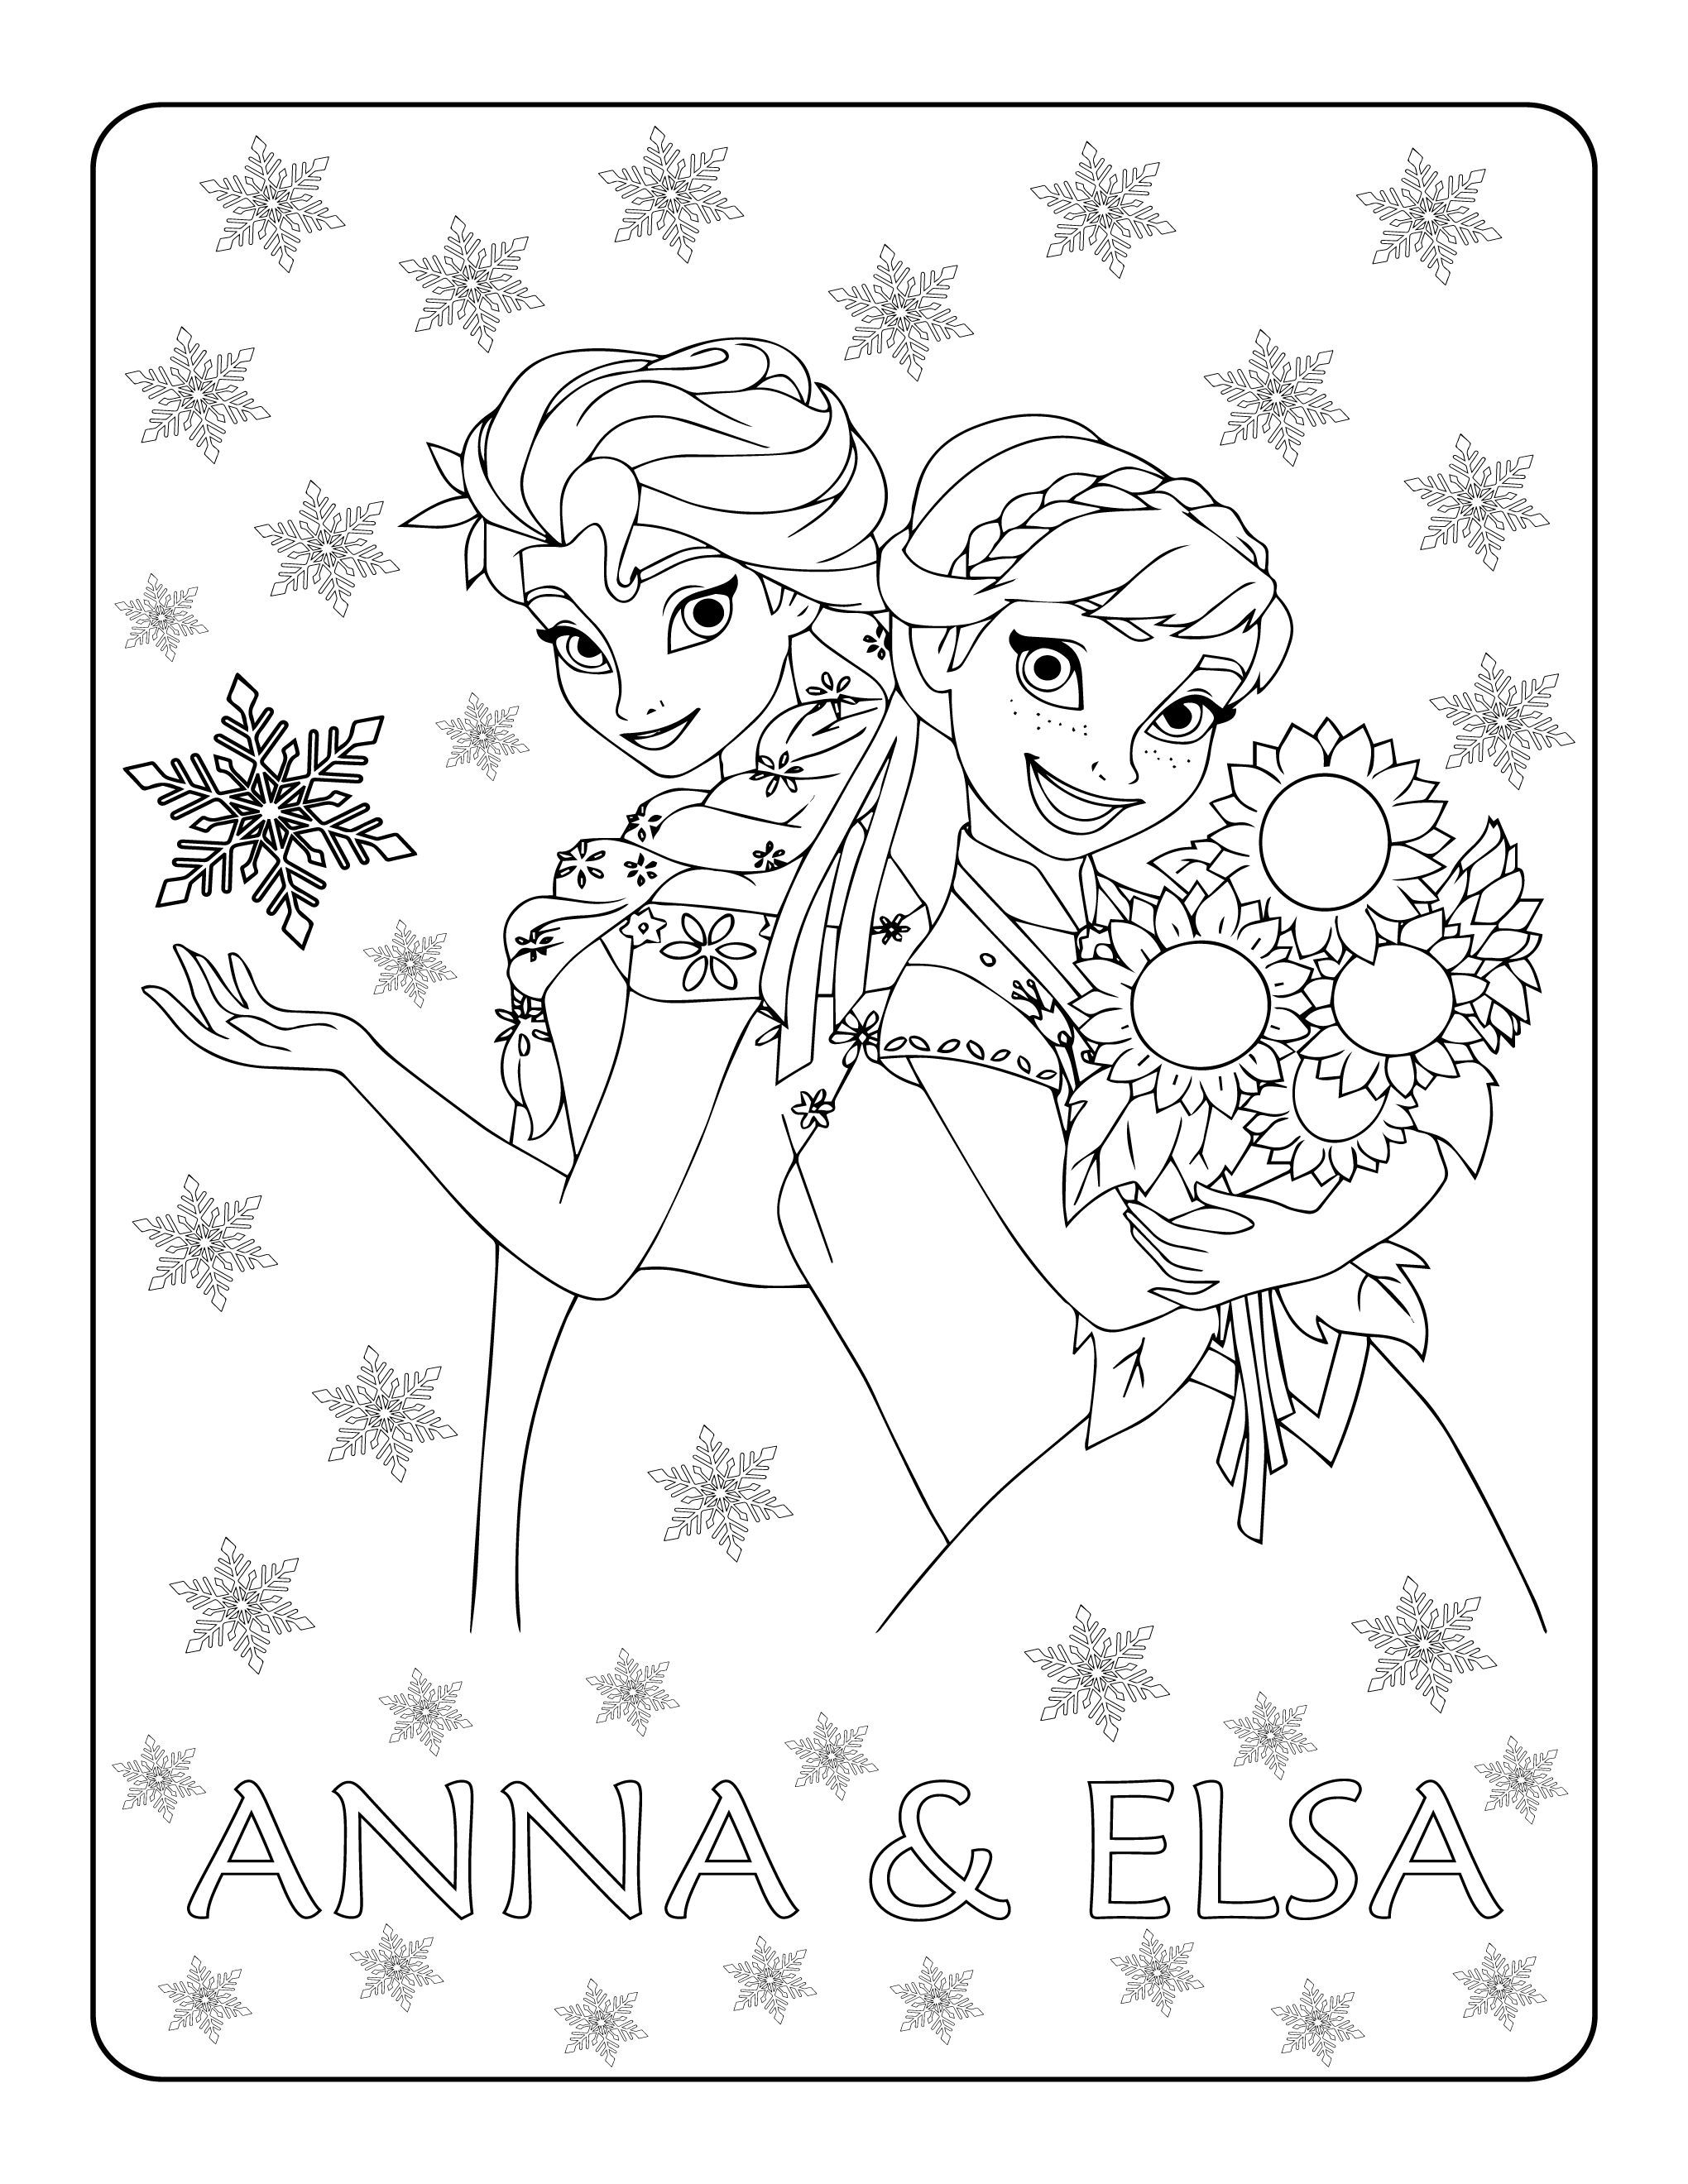 Printable Frozen 2 Anna and Elsa Coloring Page